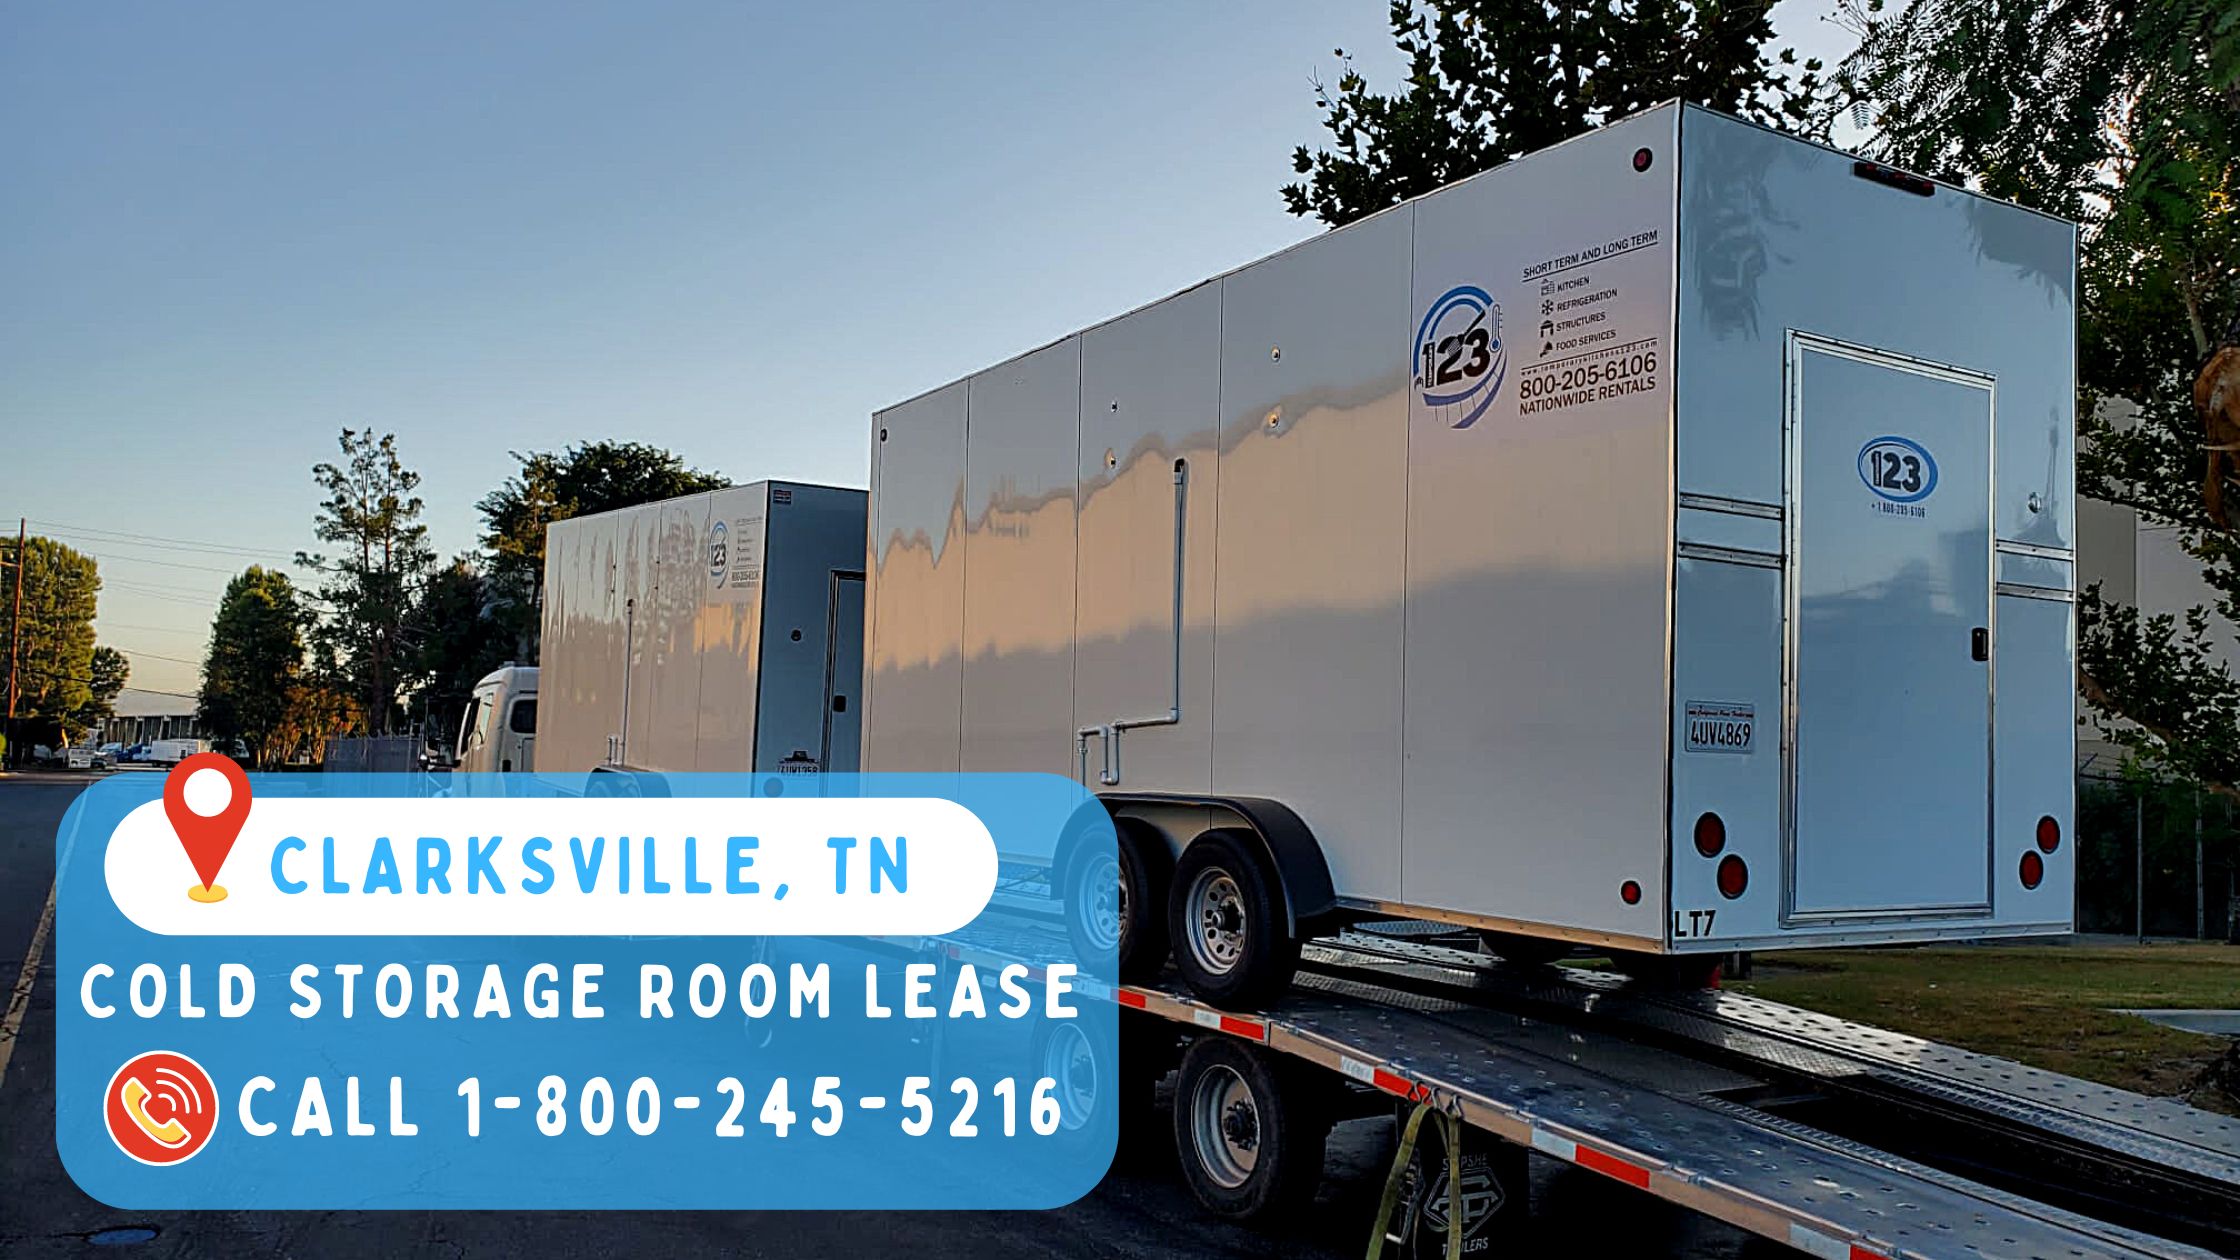 Cold Storage Room Lease in Clarksville